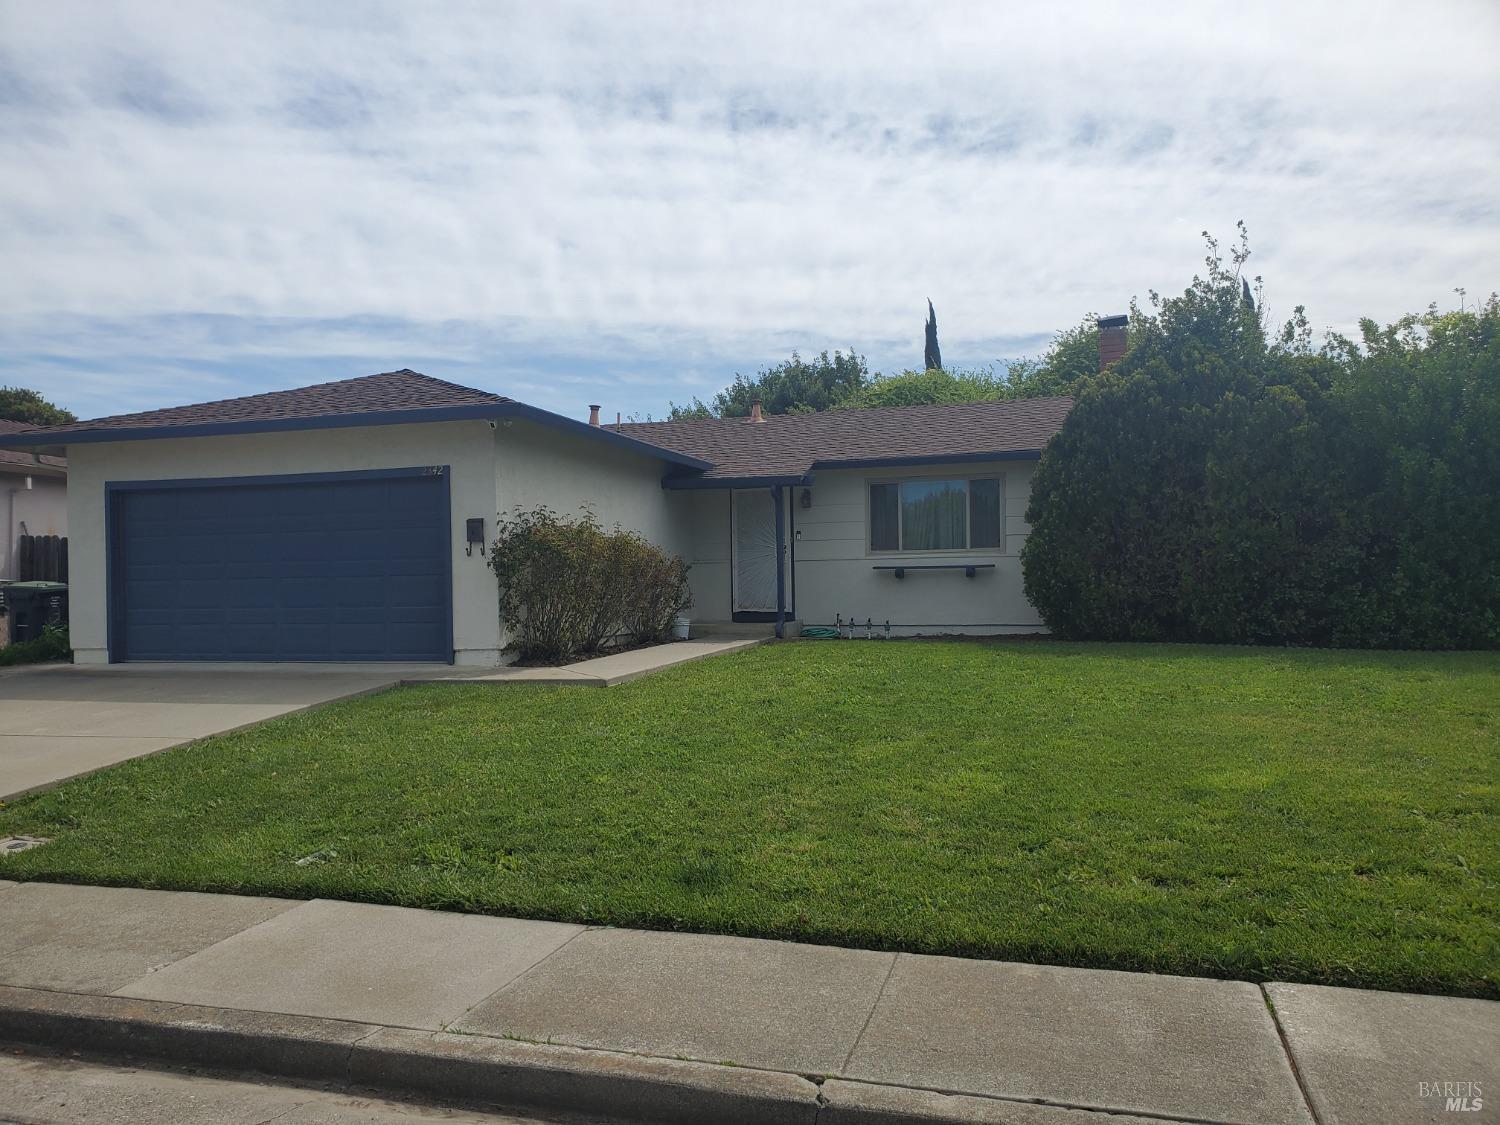 Photo of 2342 Channing Pl in Fairfield, CA